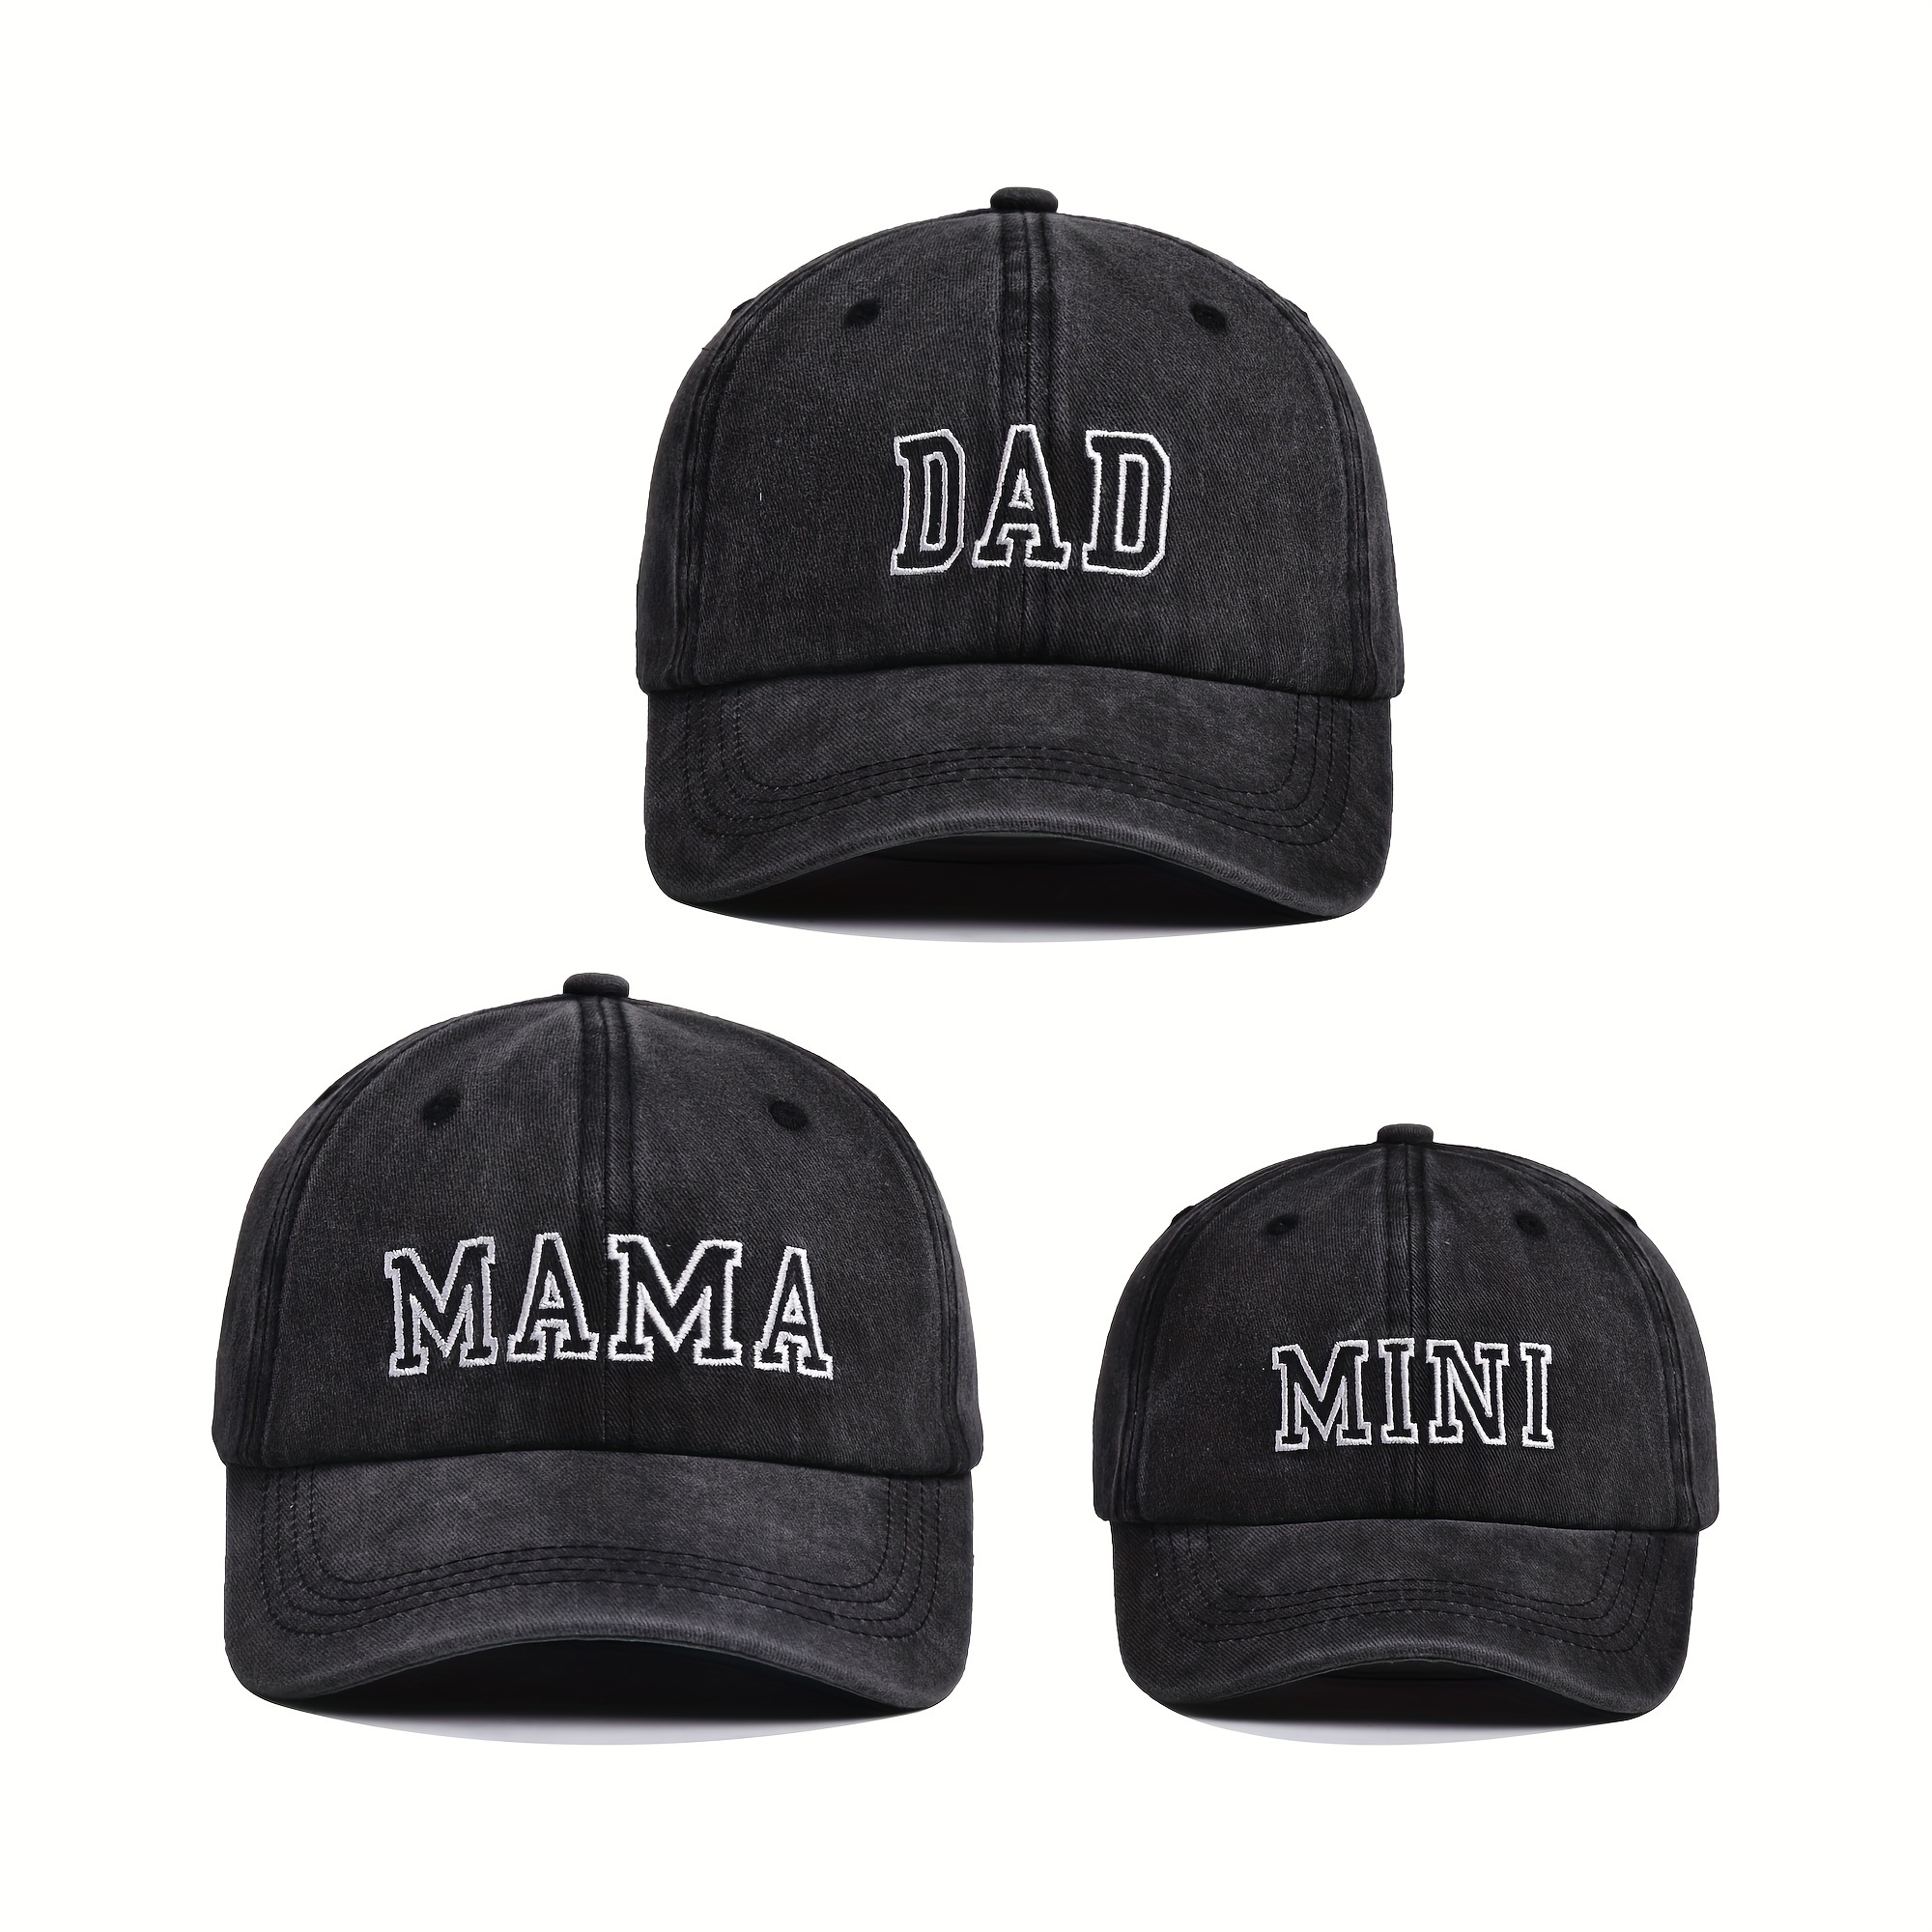 

Family Fun Baseball Caps: Mama, Papa, And Mini In Black With White Lettering - Perfect For Outdoor Adventures, Parties, And Everyday Wear - Suitable For Teens